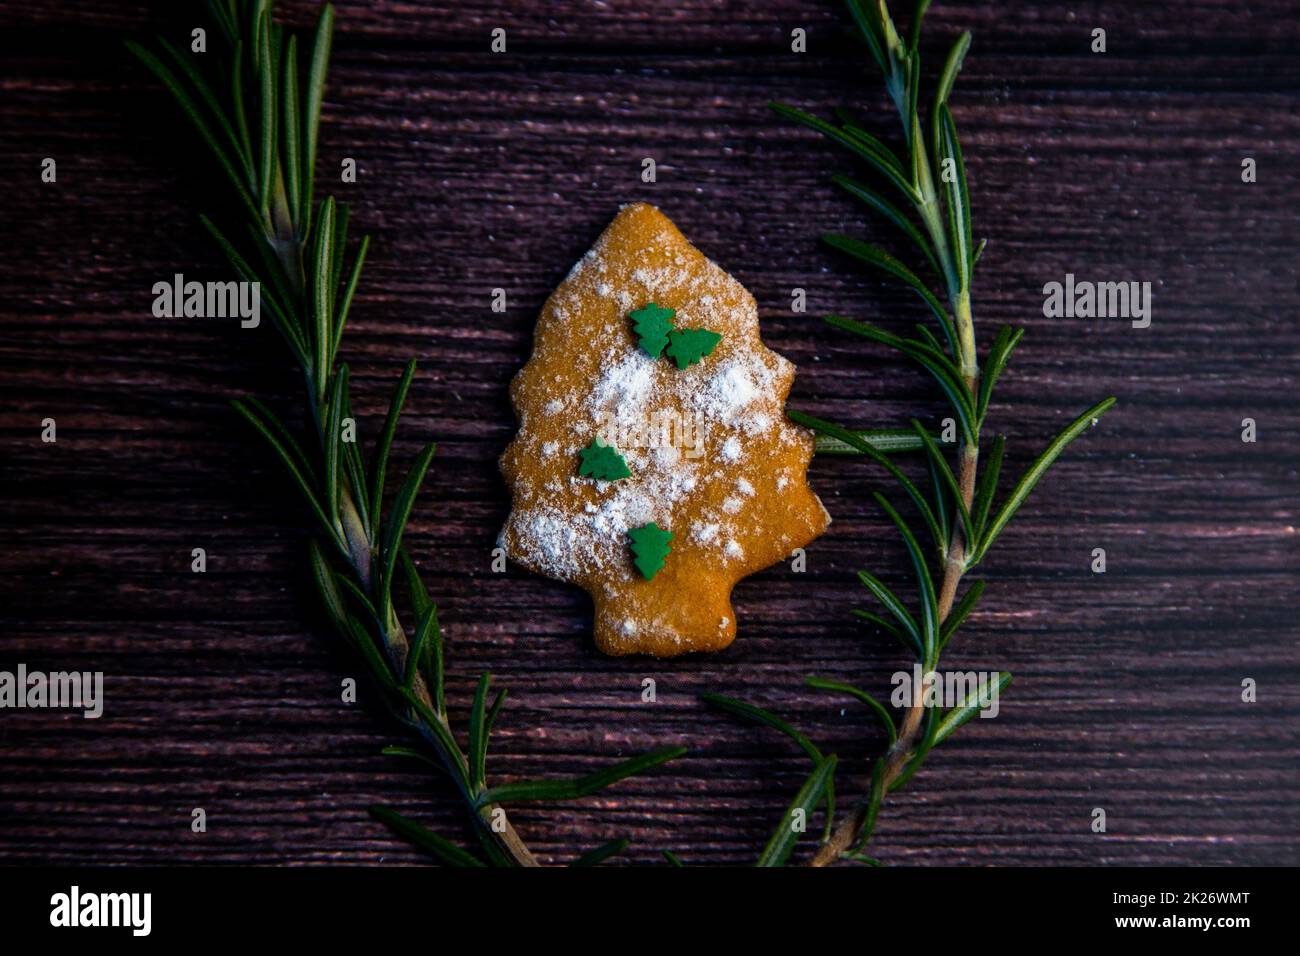 Cookies in the form of a Christmas tree, sprinkled with powdered sugar and small Christmas trees on top, lies on a dark wooden background surrounded by grained rosemary Stock Photo